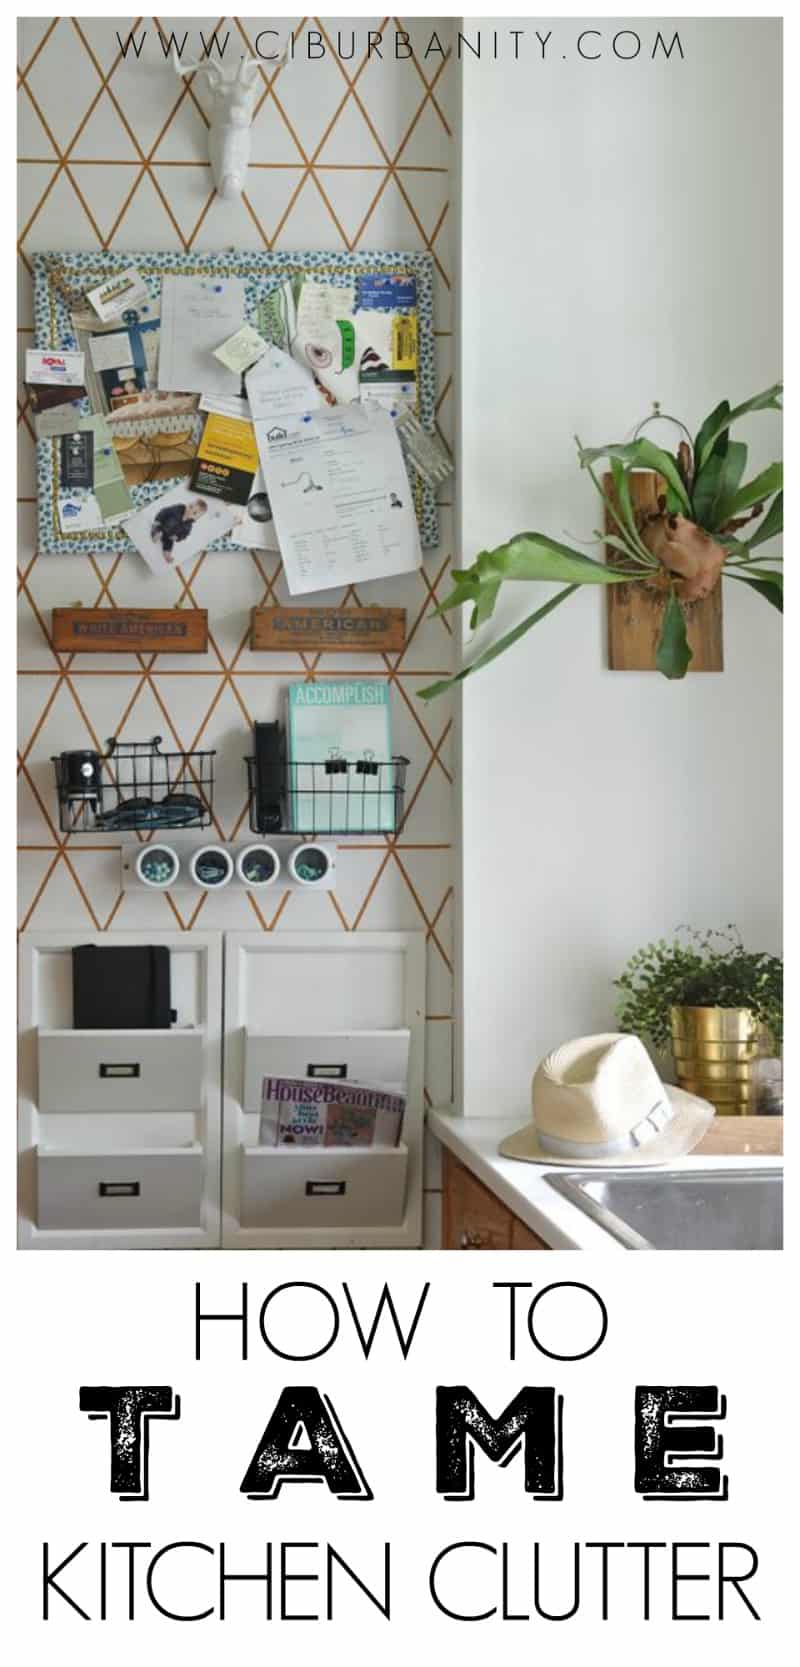 Fun kitchen command center with repurposed storage and graphic paint detail.